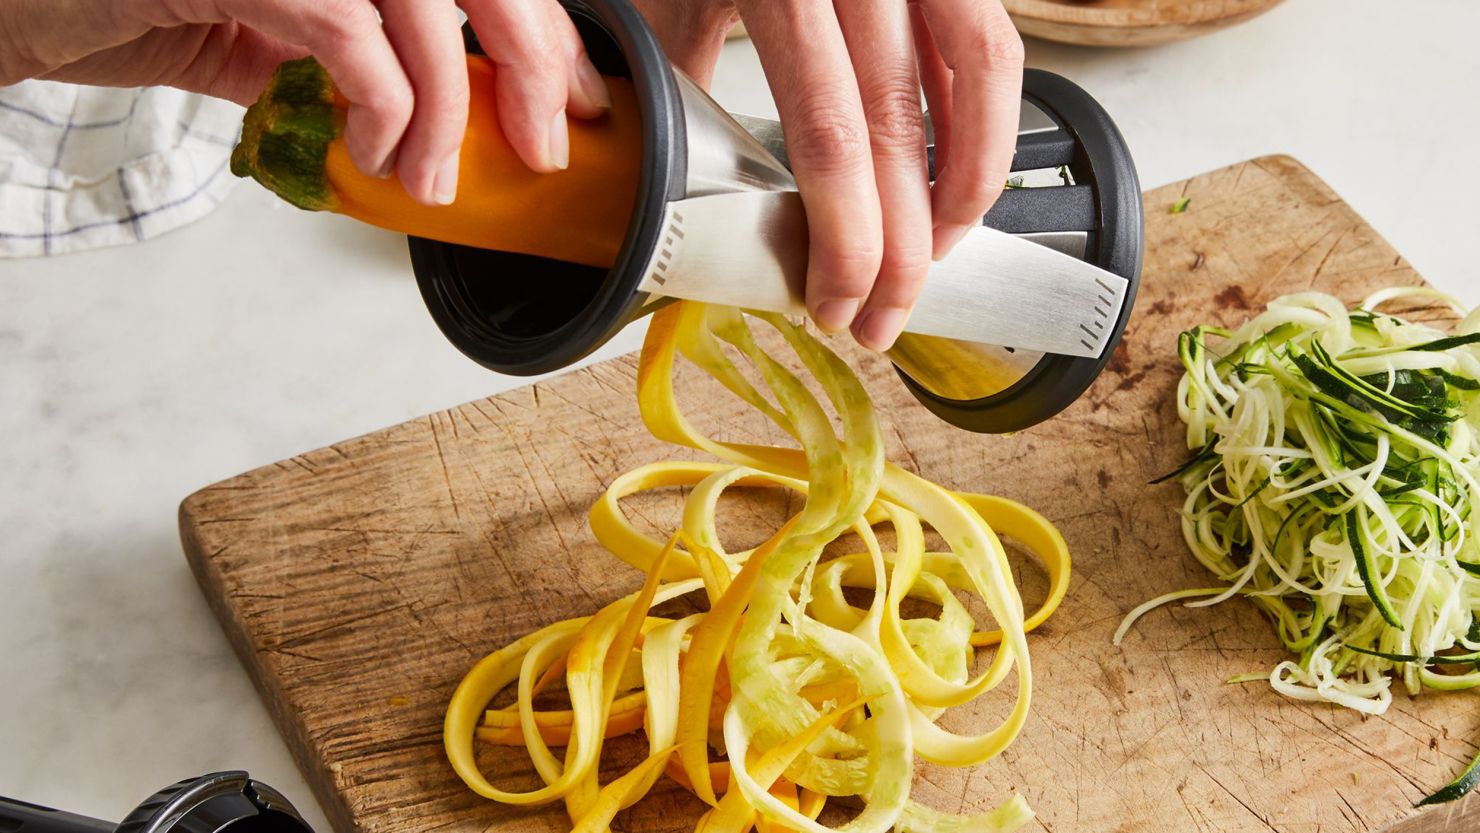 Best Editor-Approved Cooking Products and Gadgets